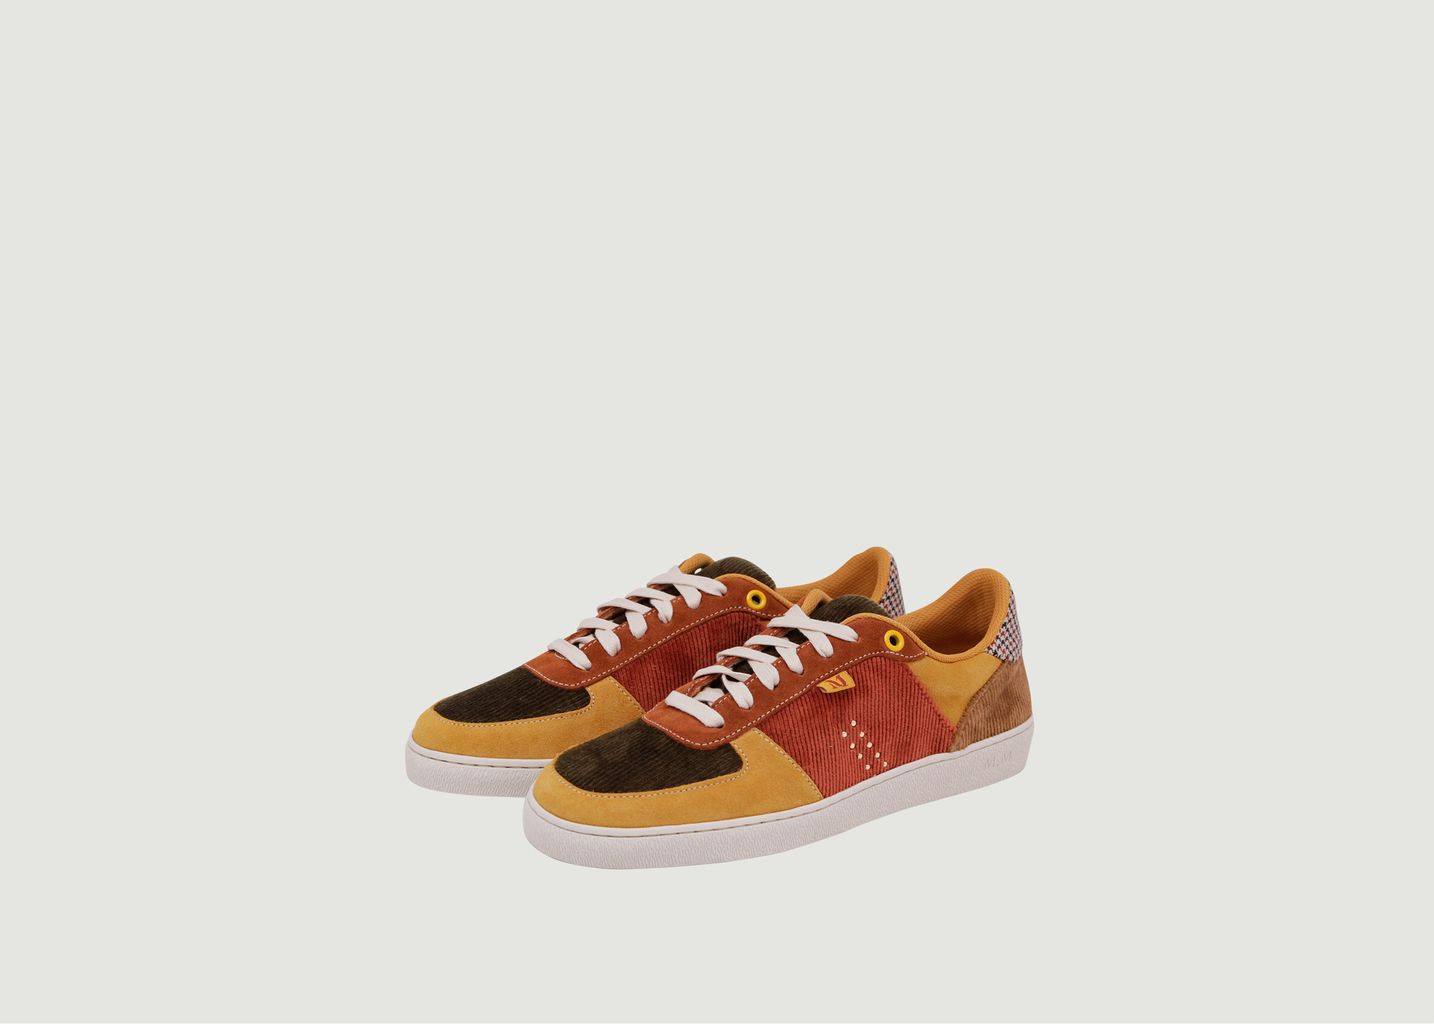 Marie corduroy and suede leather low sneakers - M.Moustache